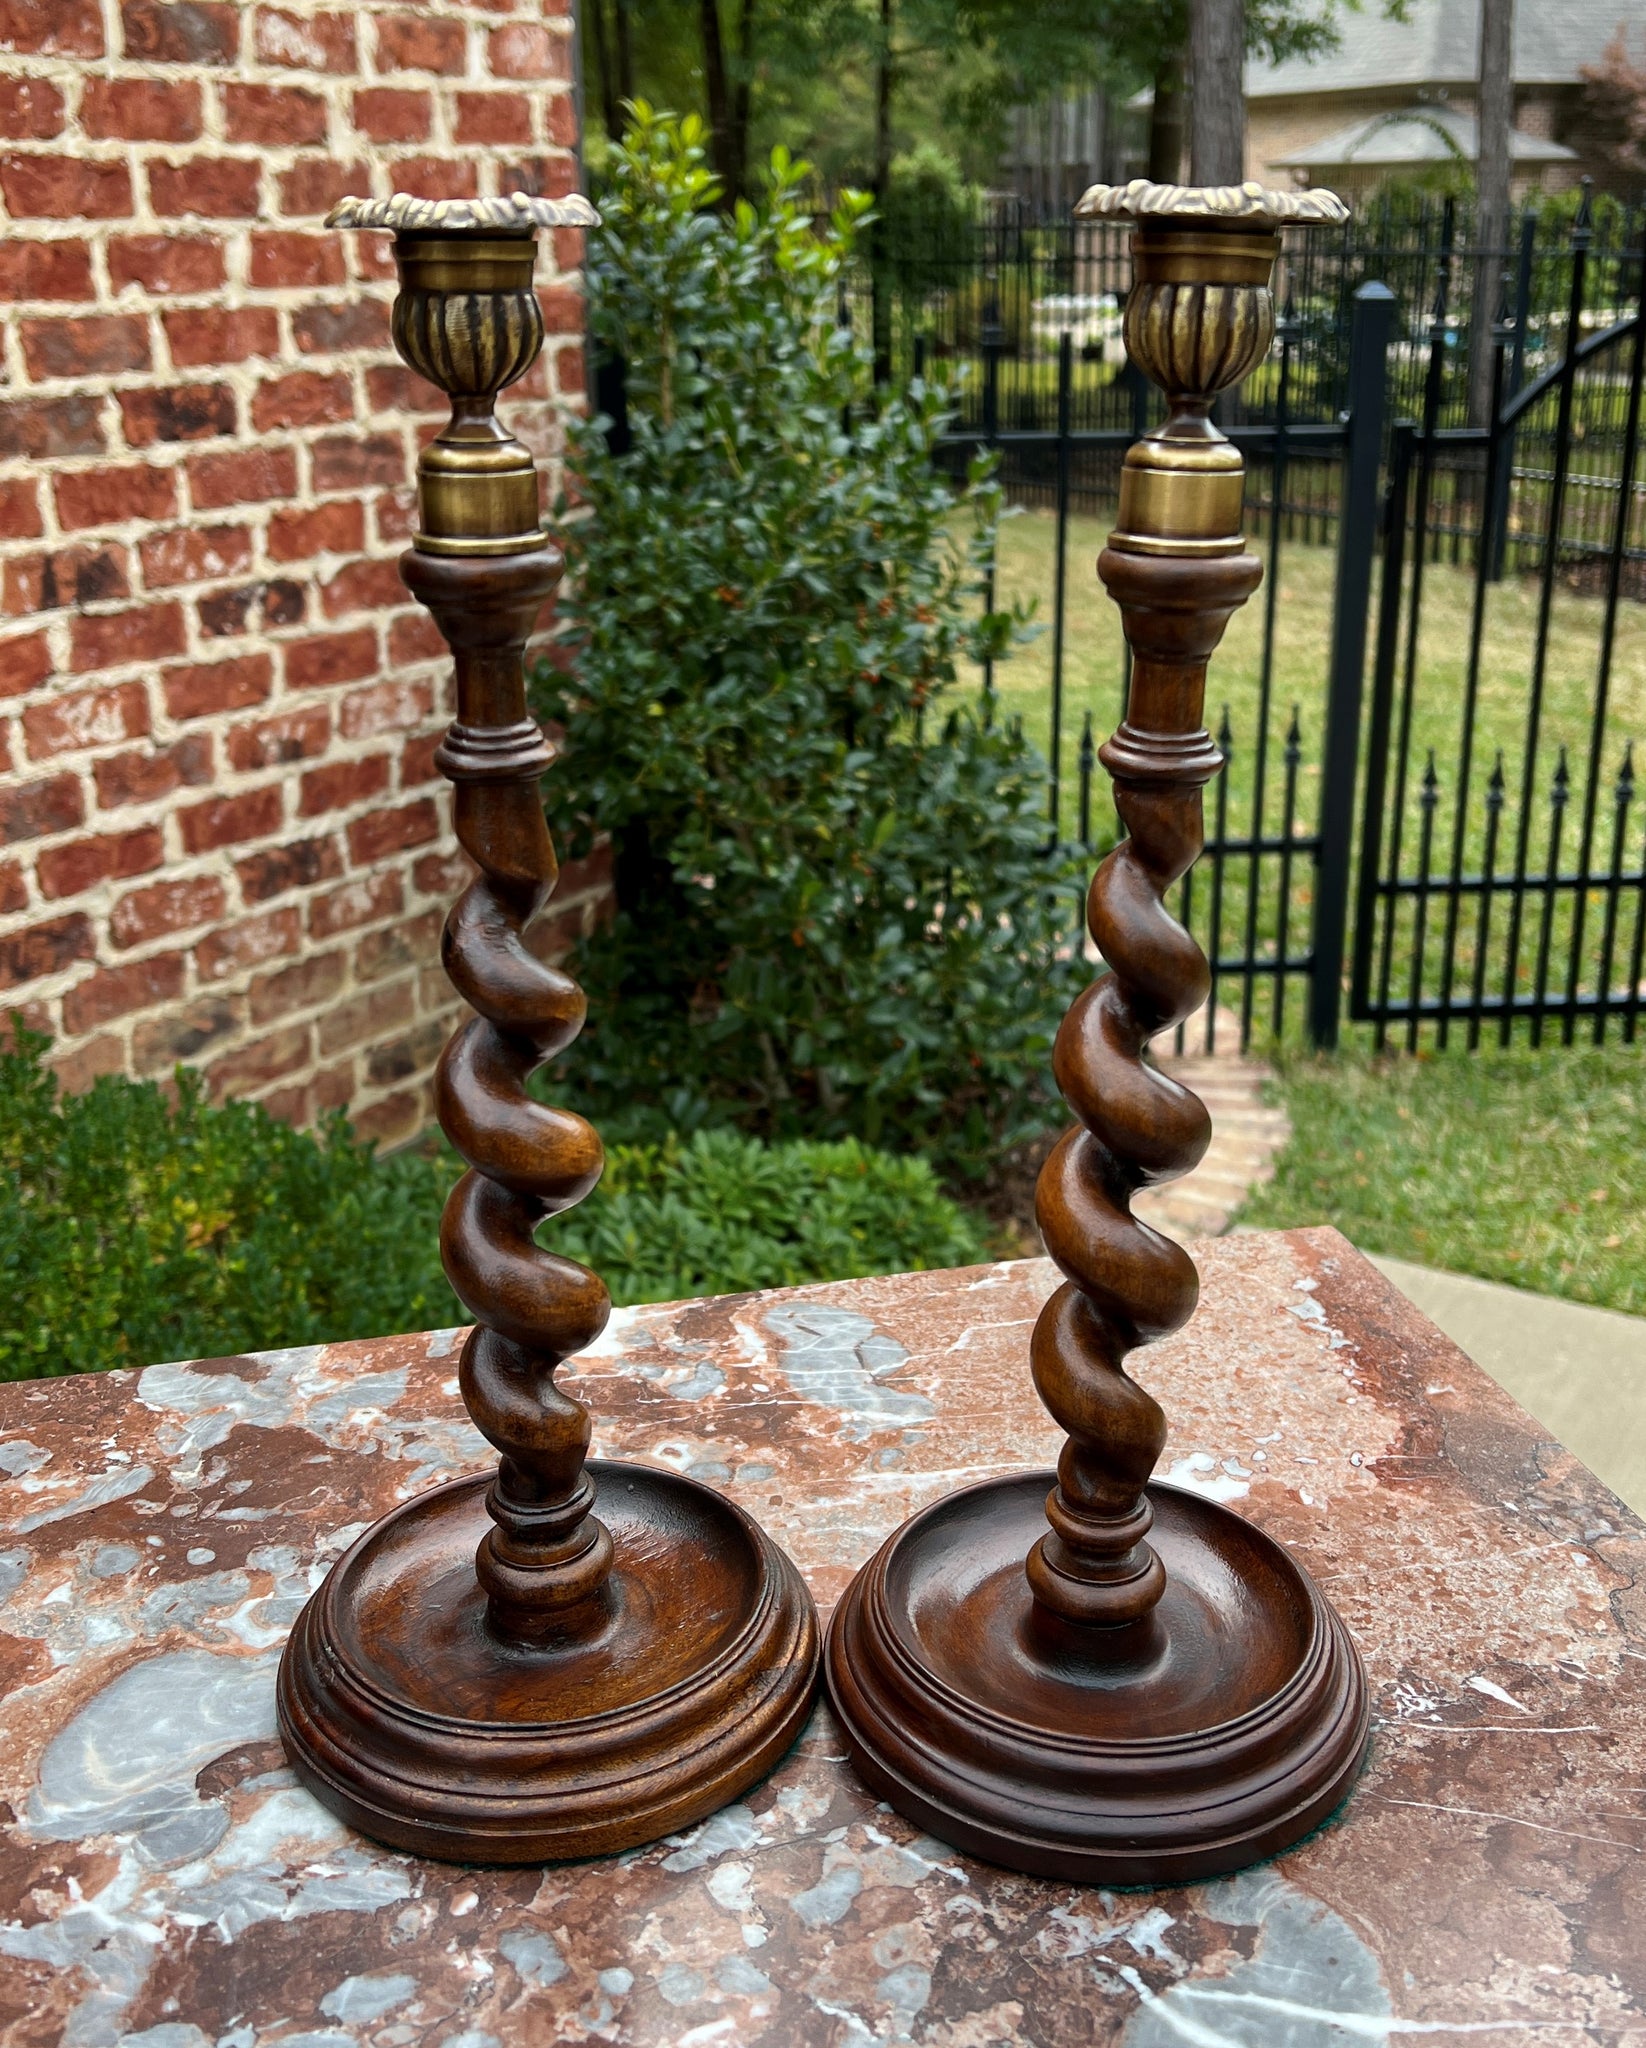 Pair of Antique English Barley Twist Candlesticks For Sale at